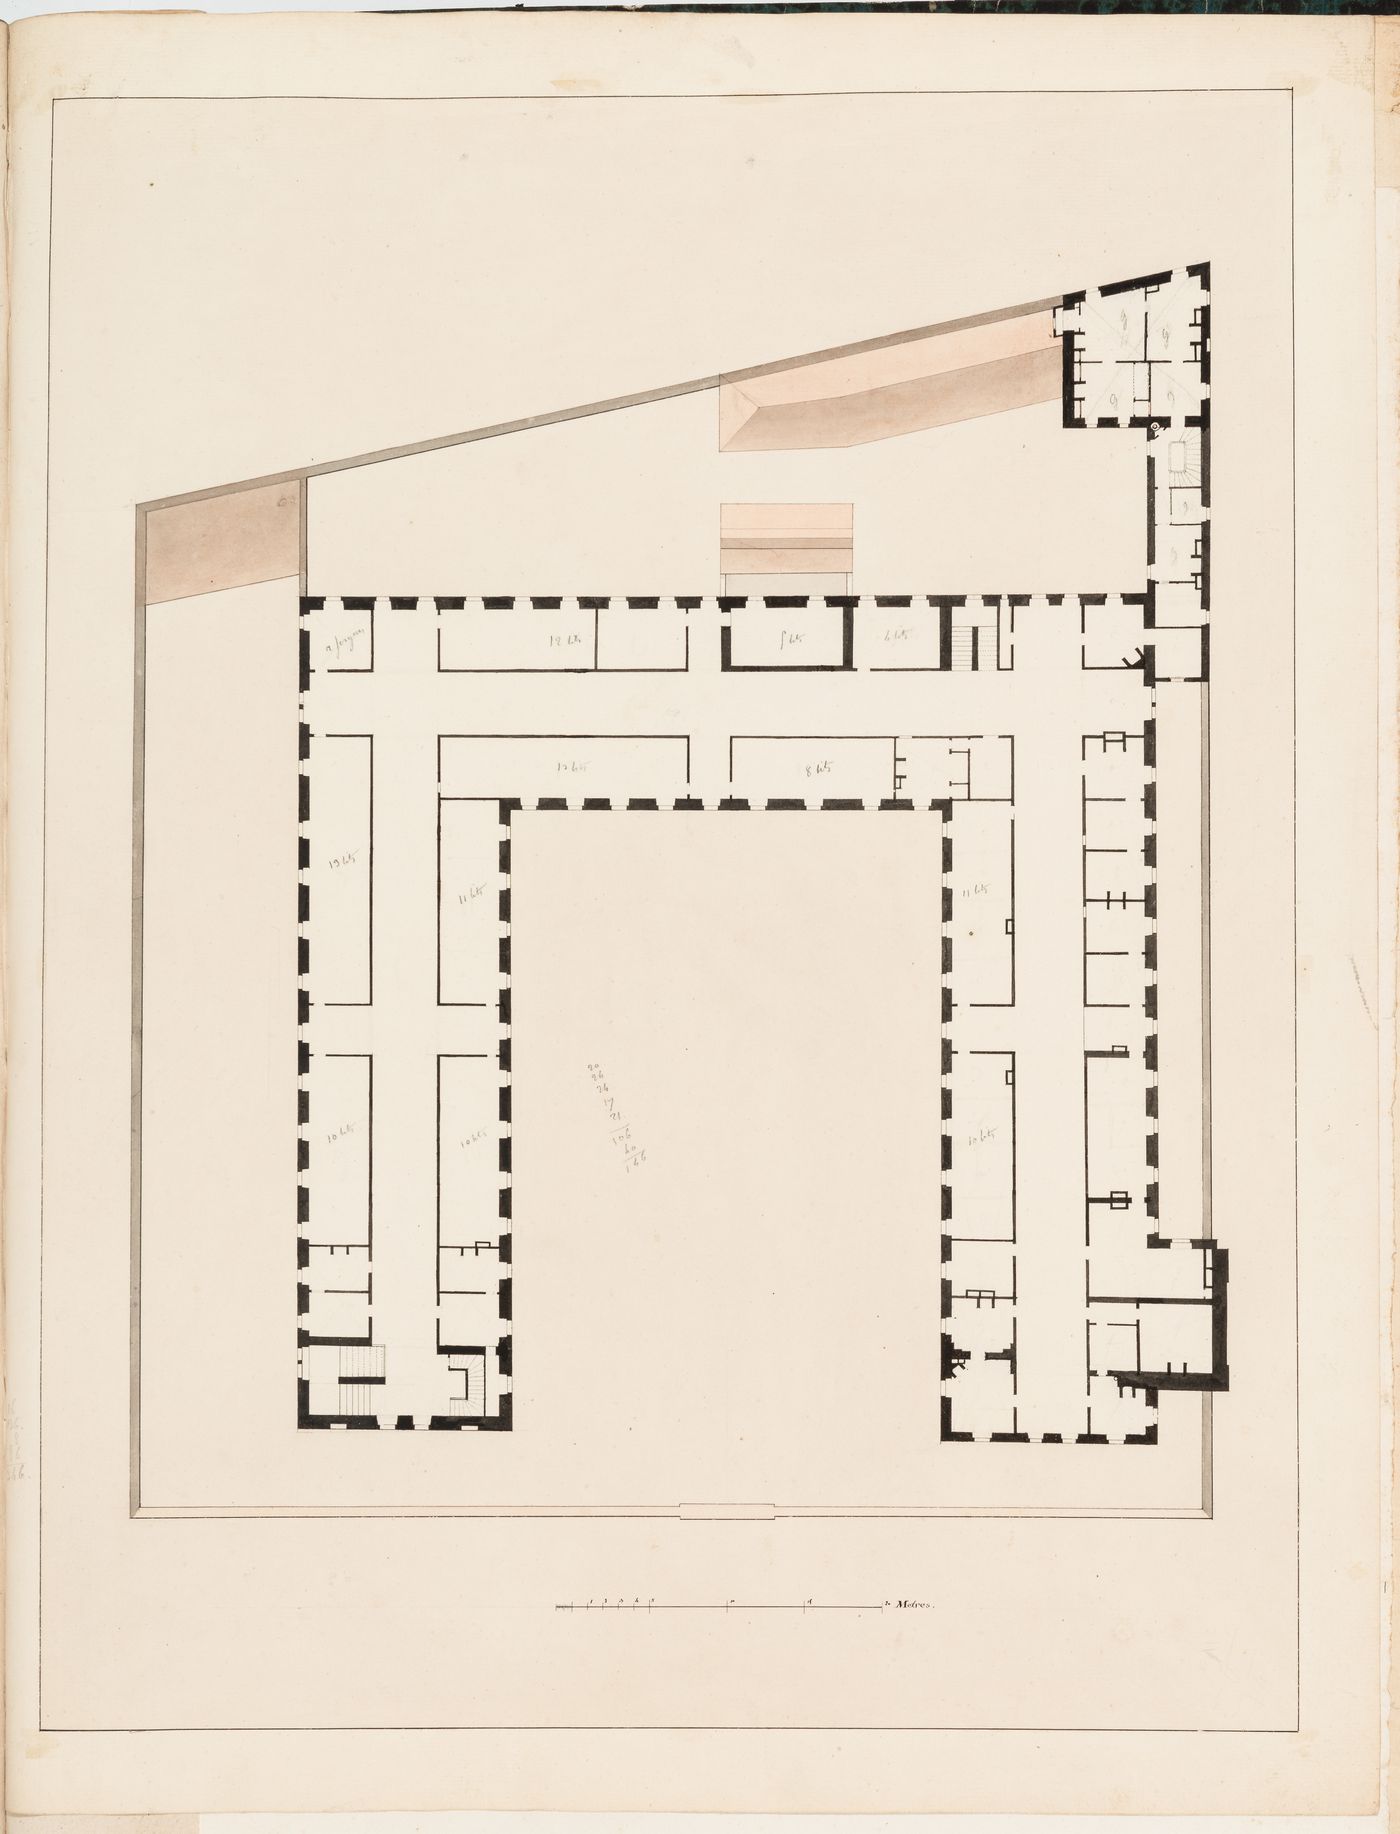 Project for alterations to the Caserne des Minimes, rue des Minimes: Plan